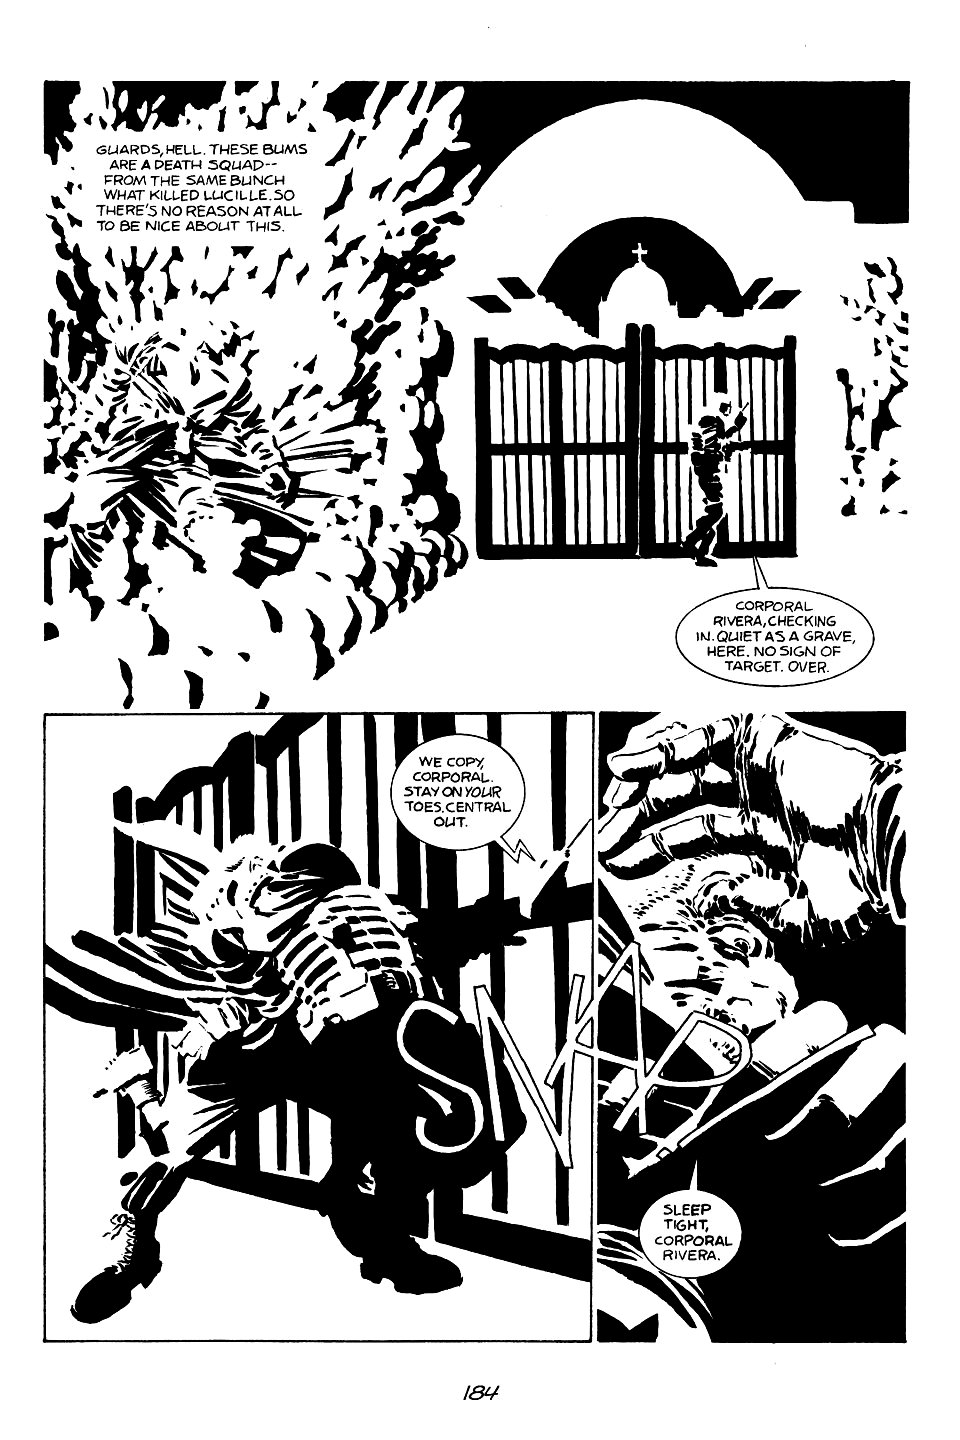 page 184 of sin city 1 the hard goodbye